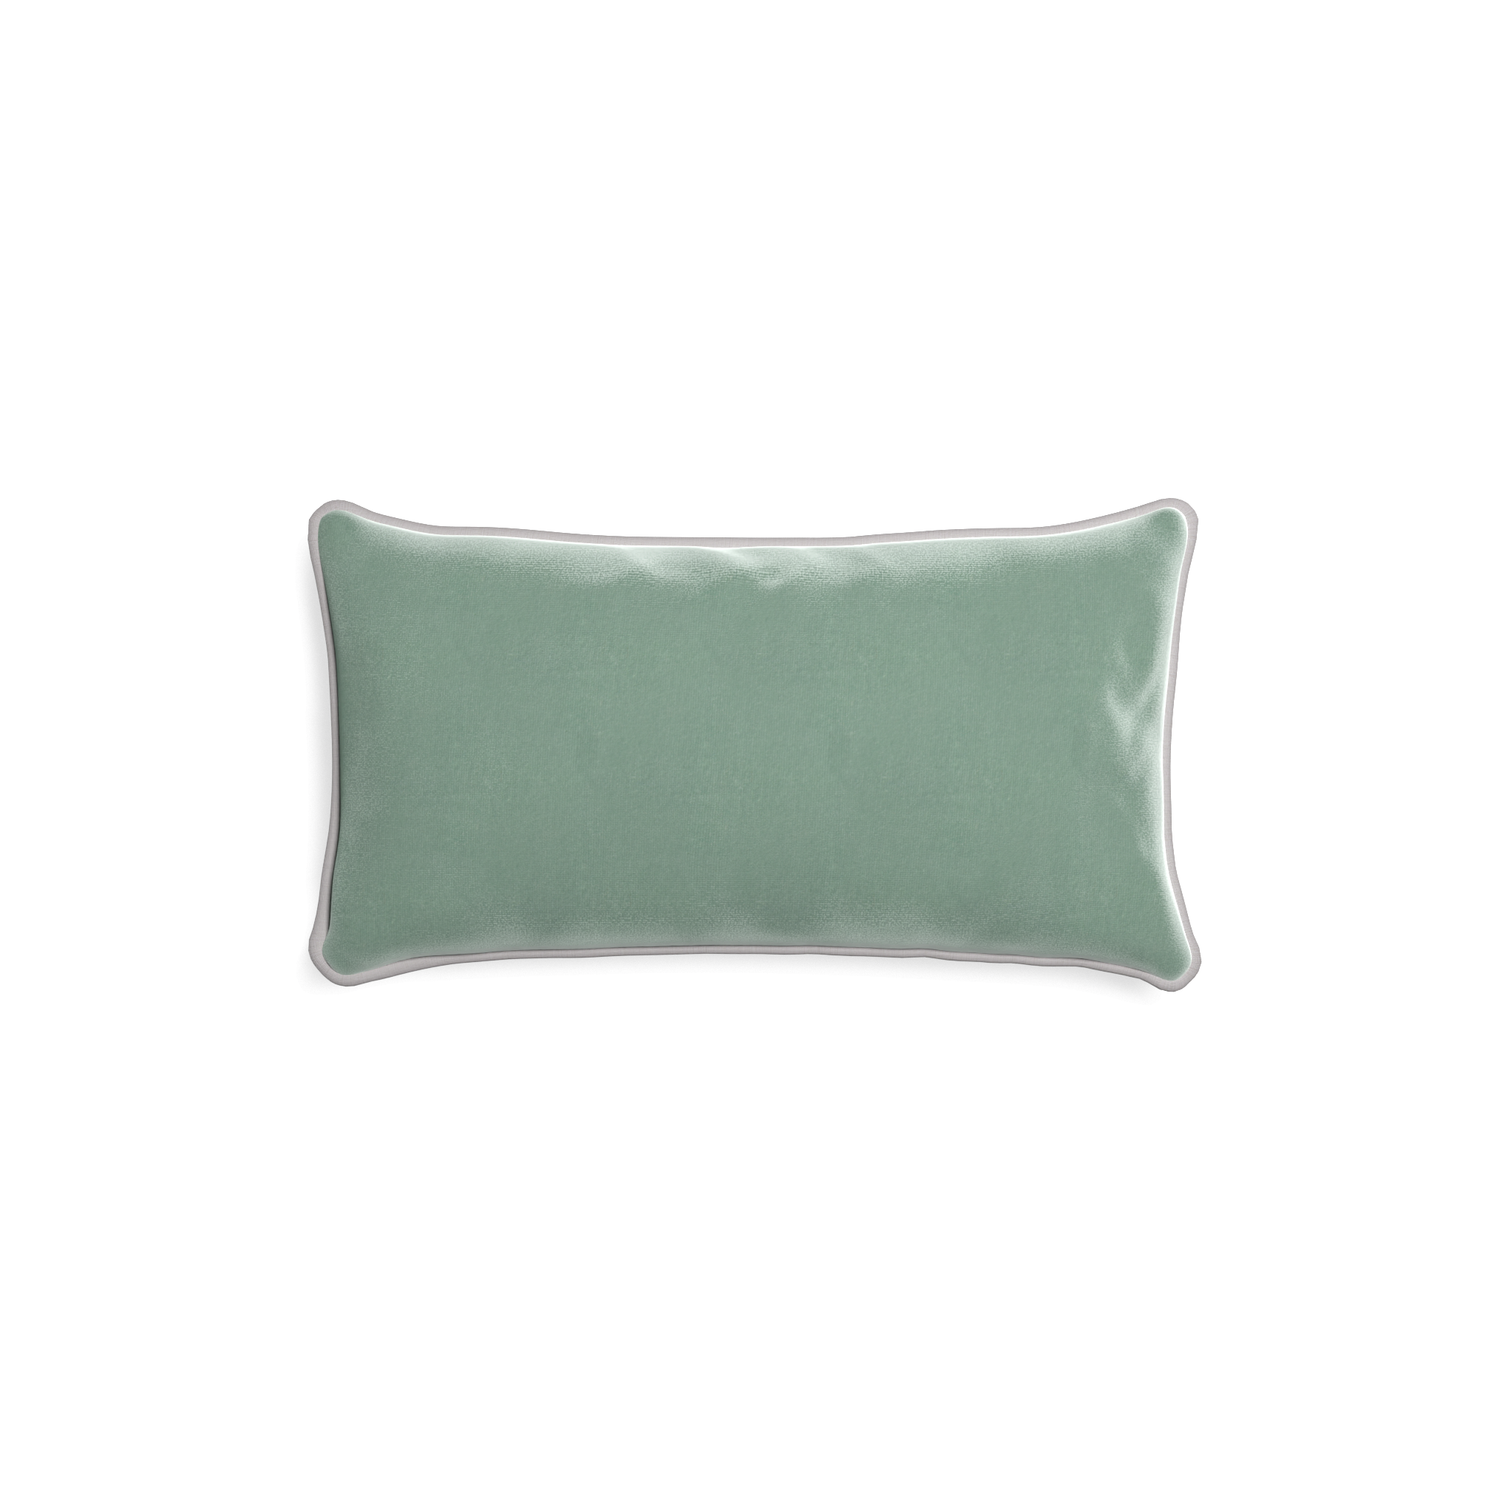 rectangle blue green velvet pillow with gray piping